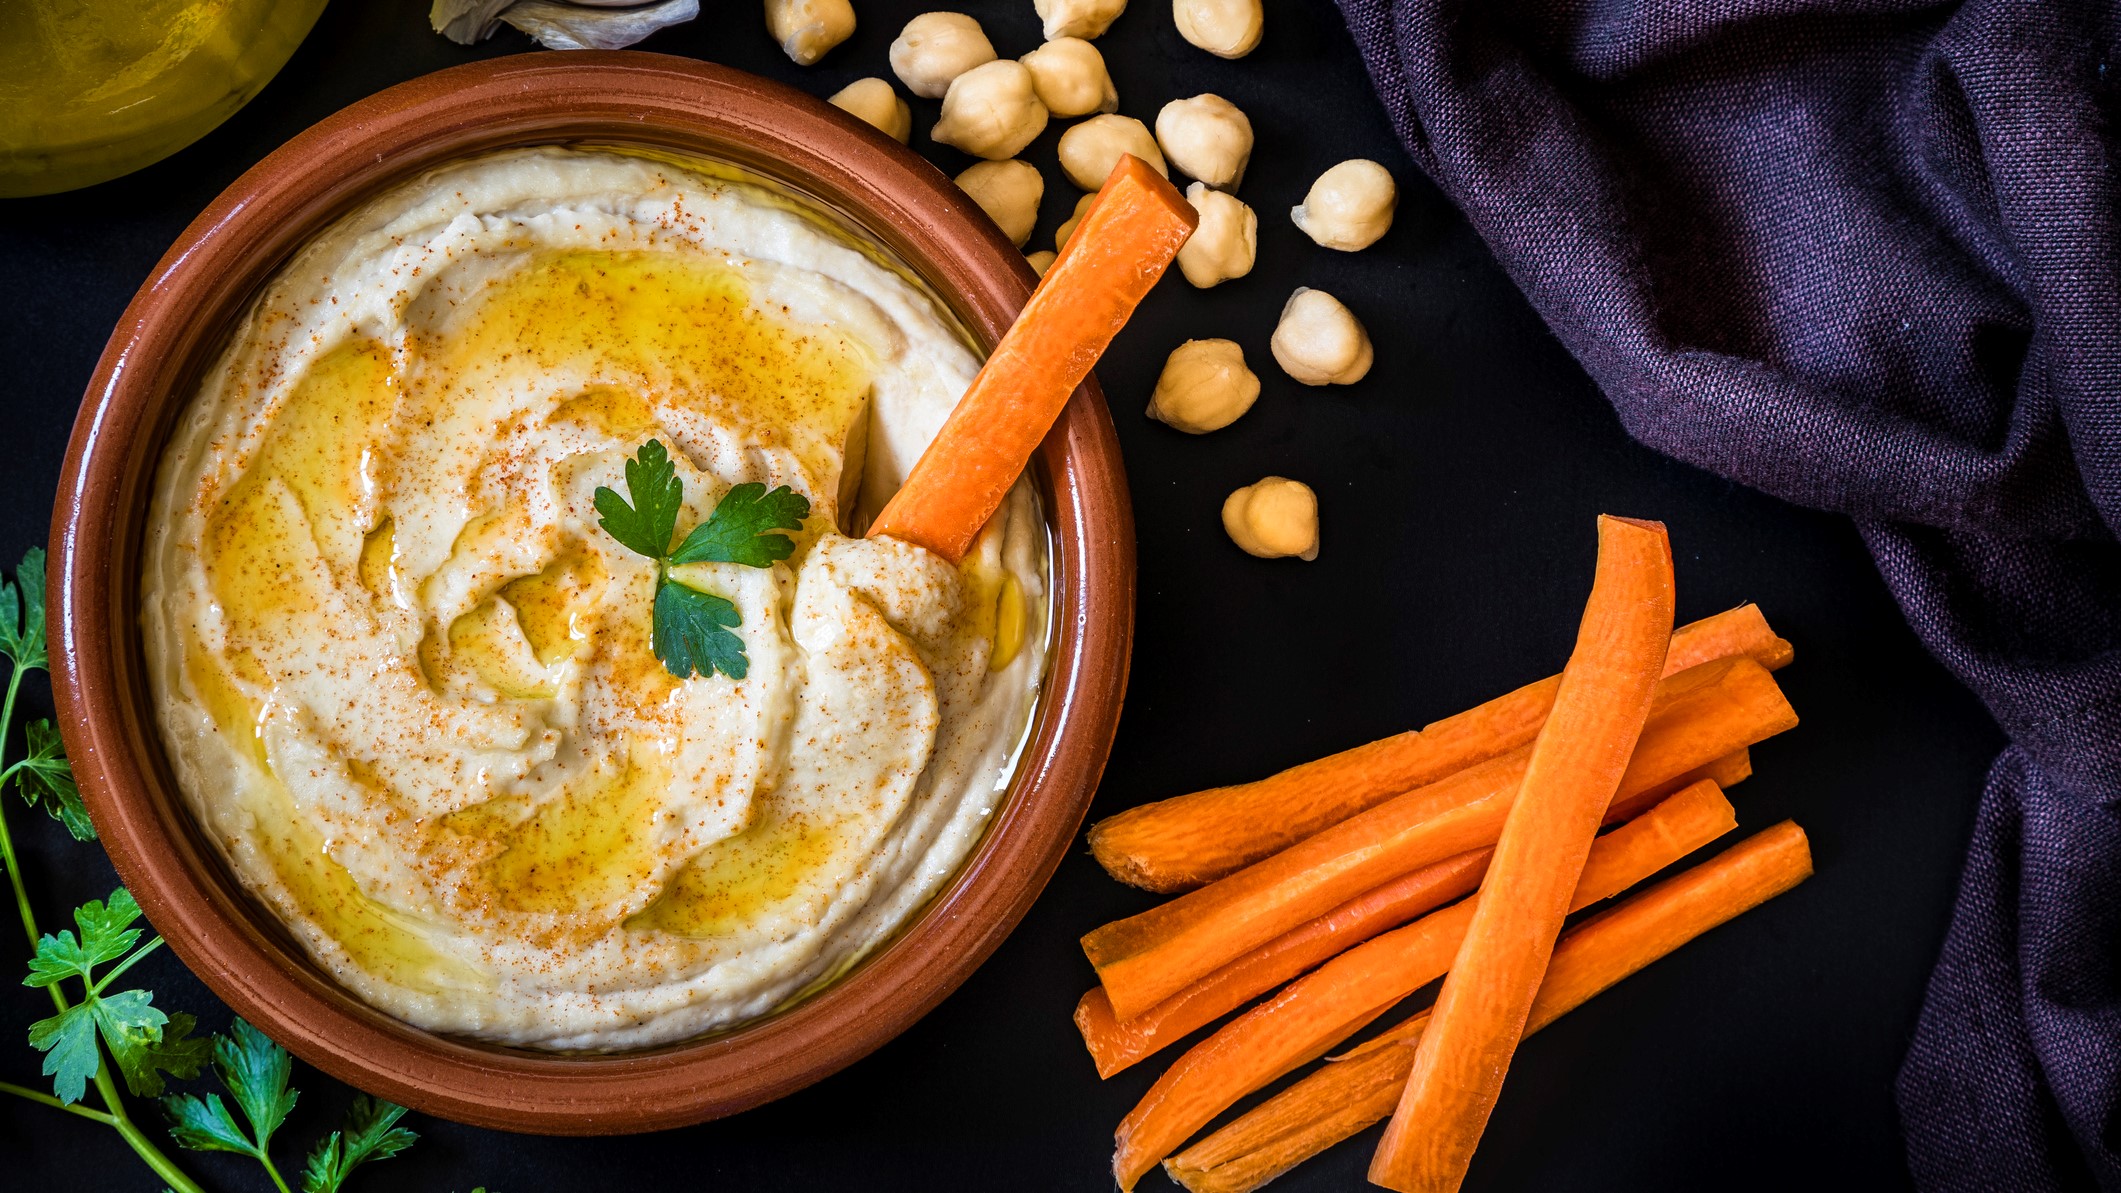 A photo of some hummus with carrot sticks